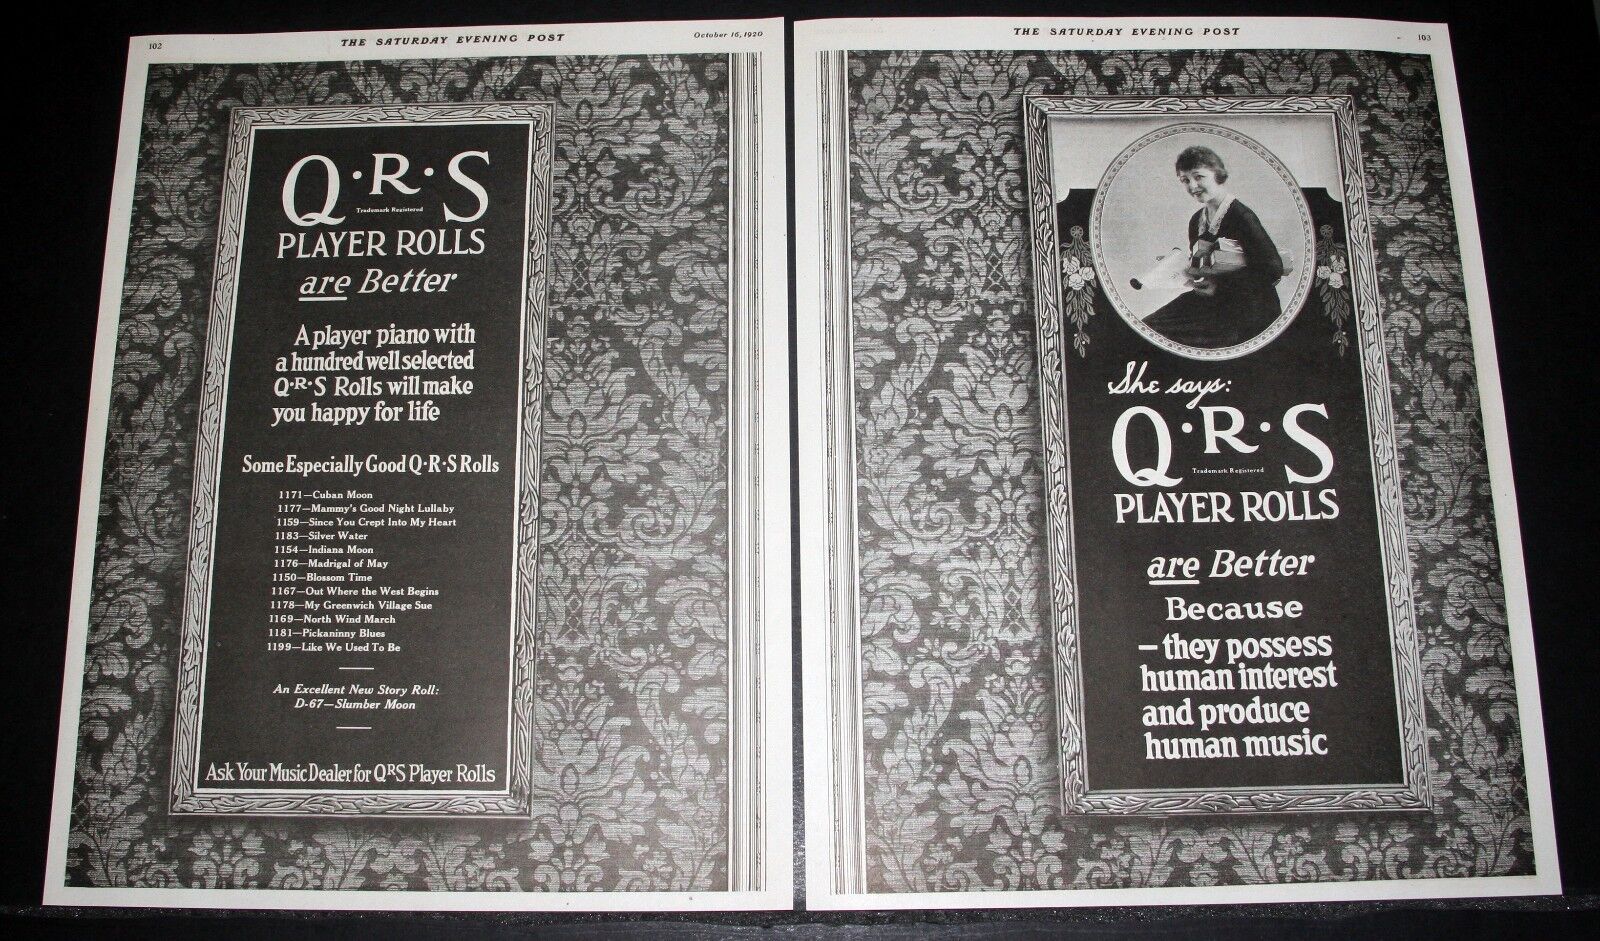 1920 OLD MAGAZINE PRINT AD, Q-R-S PLAYER PIANO ROLLS ARE BETTER, HUMAN INTEREST